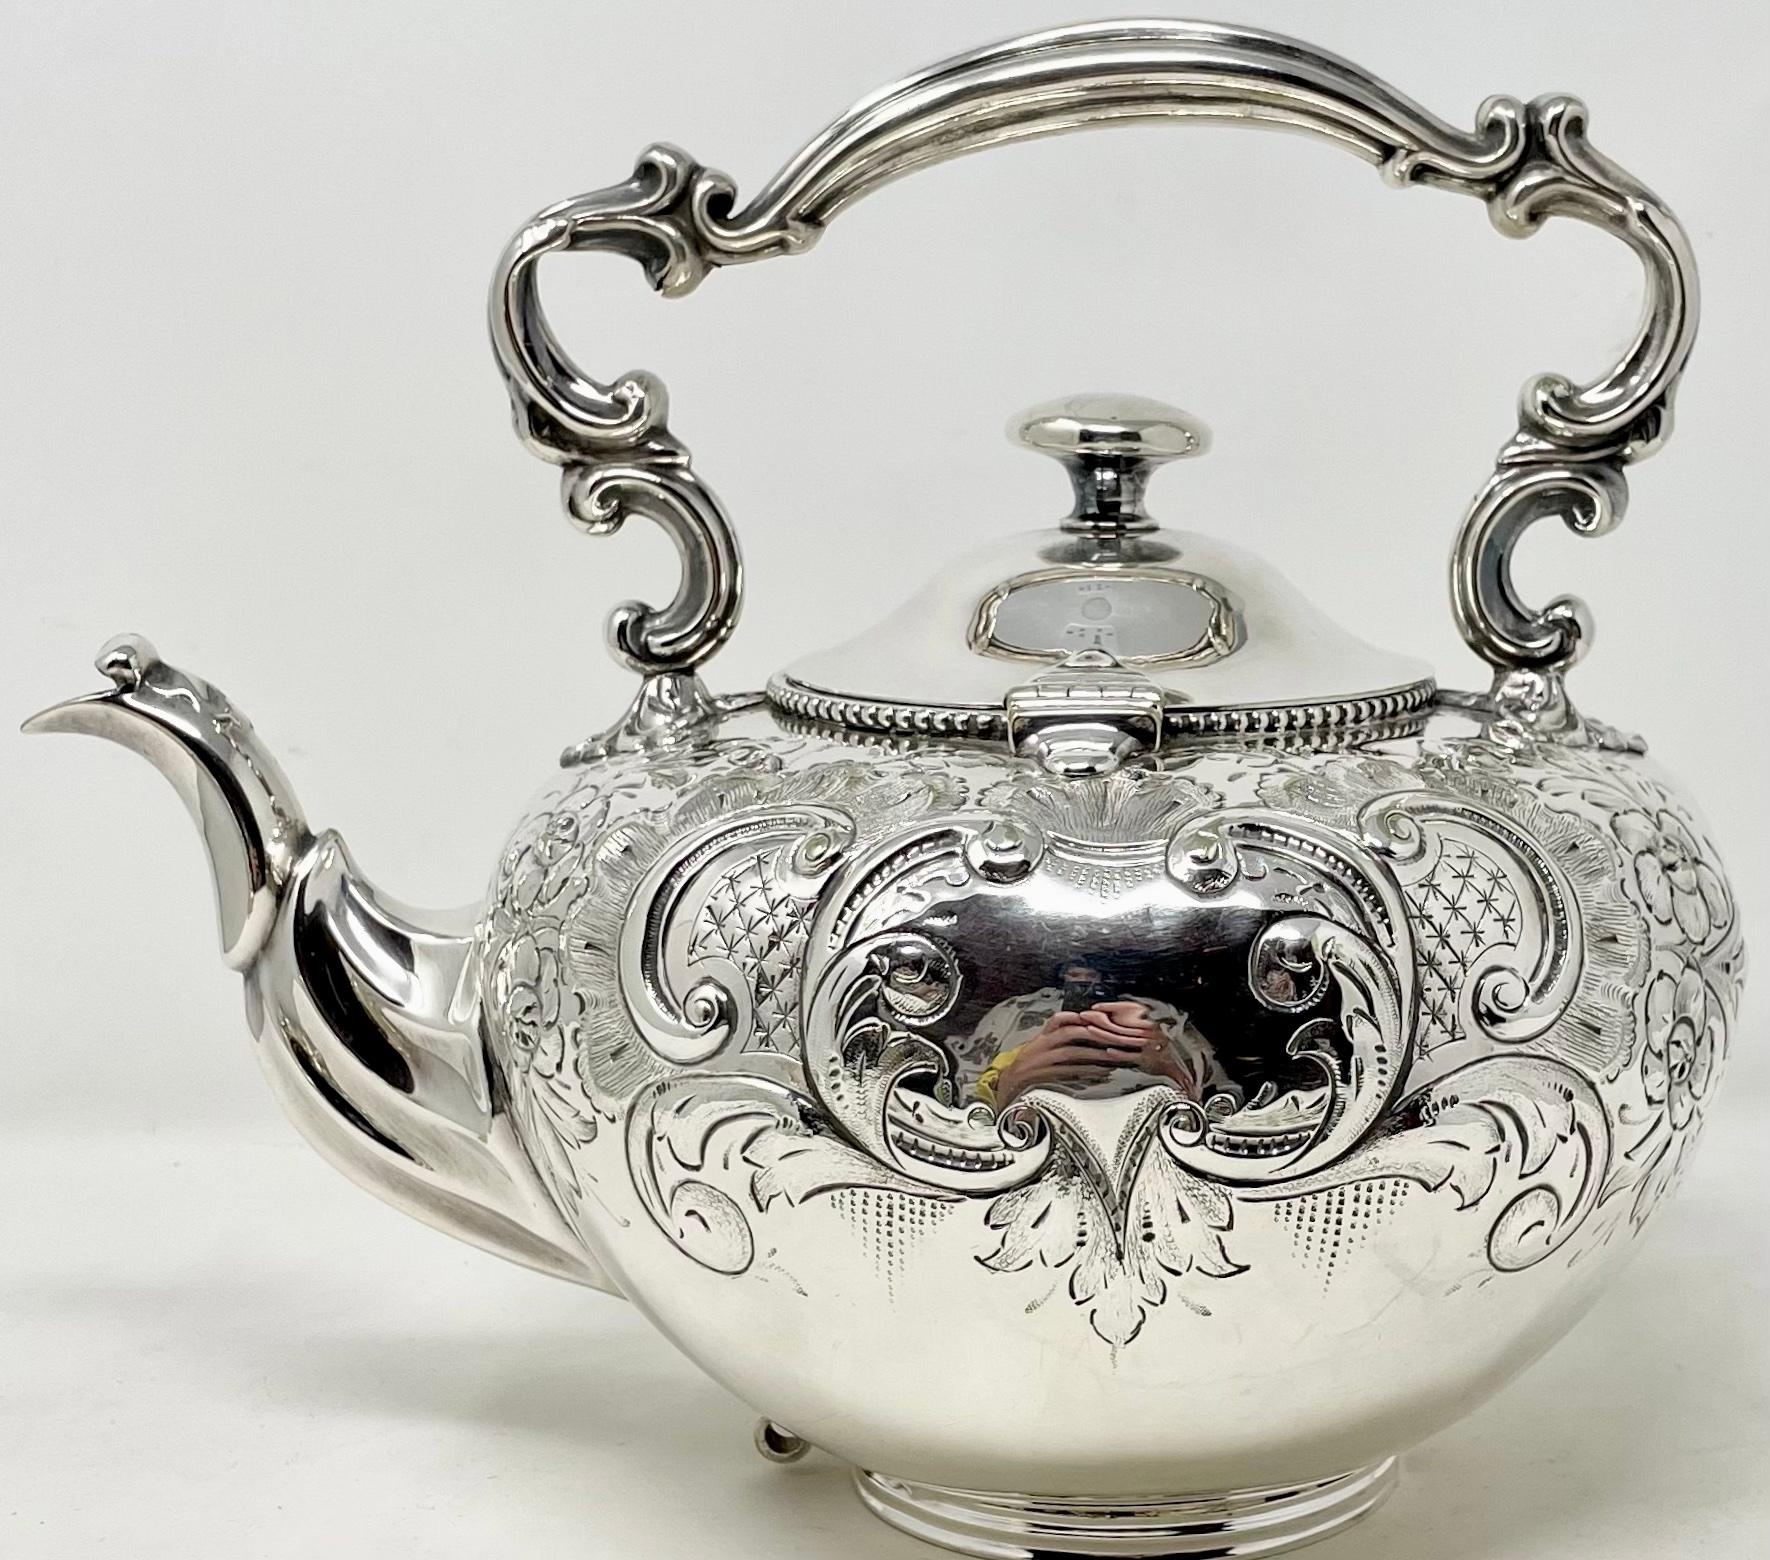 19th Century Antique English Sheffield Silver-Plate Footed Tea Pot with Etching, Circa 1860. For Sale